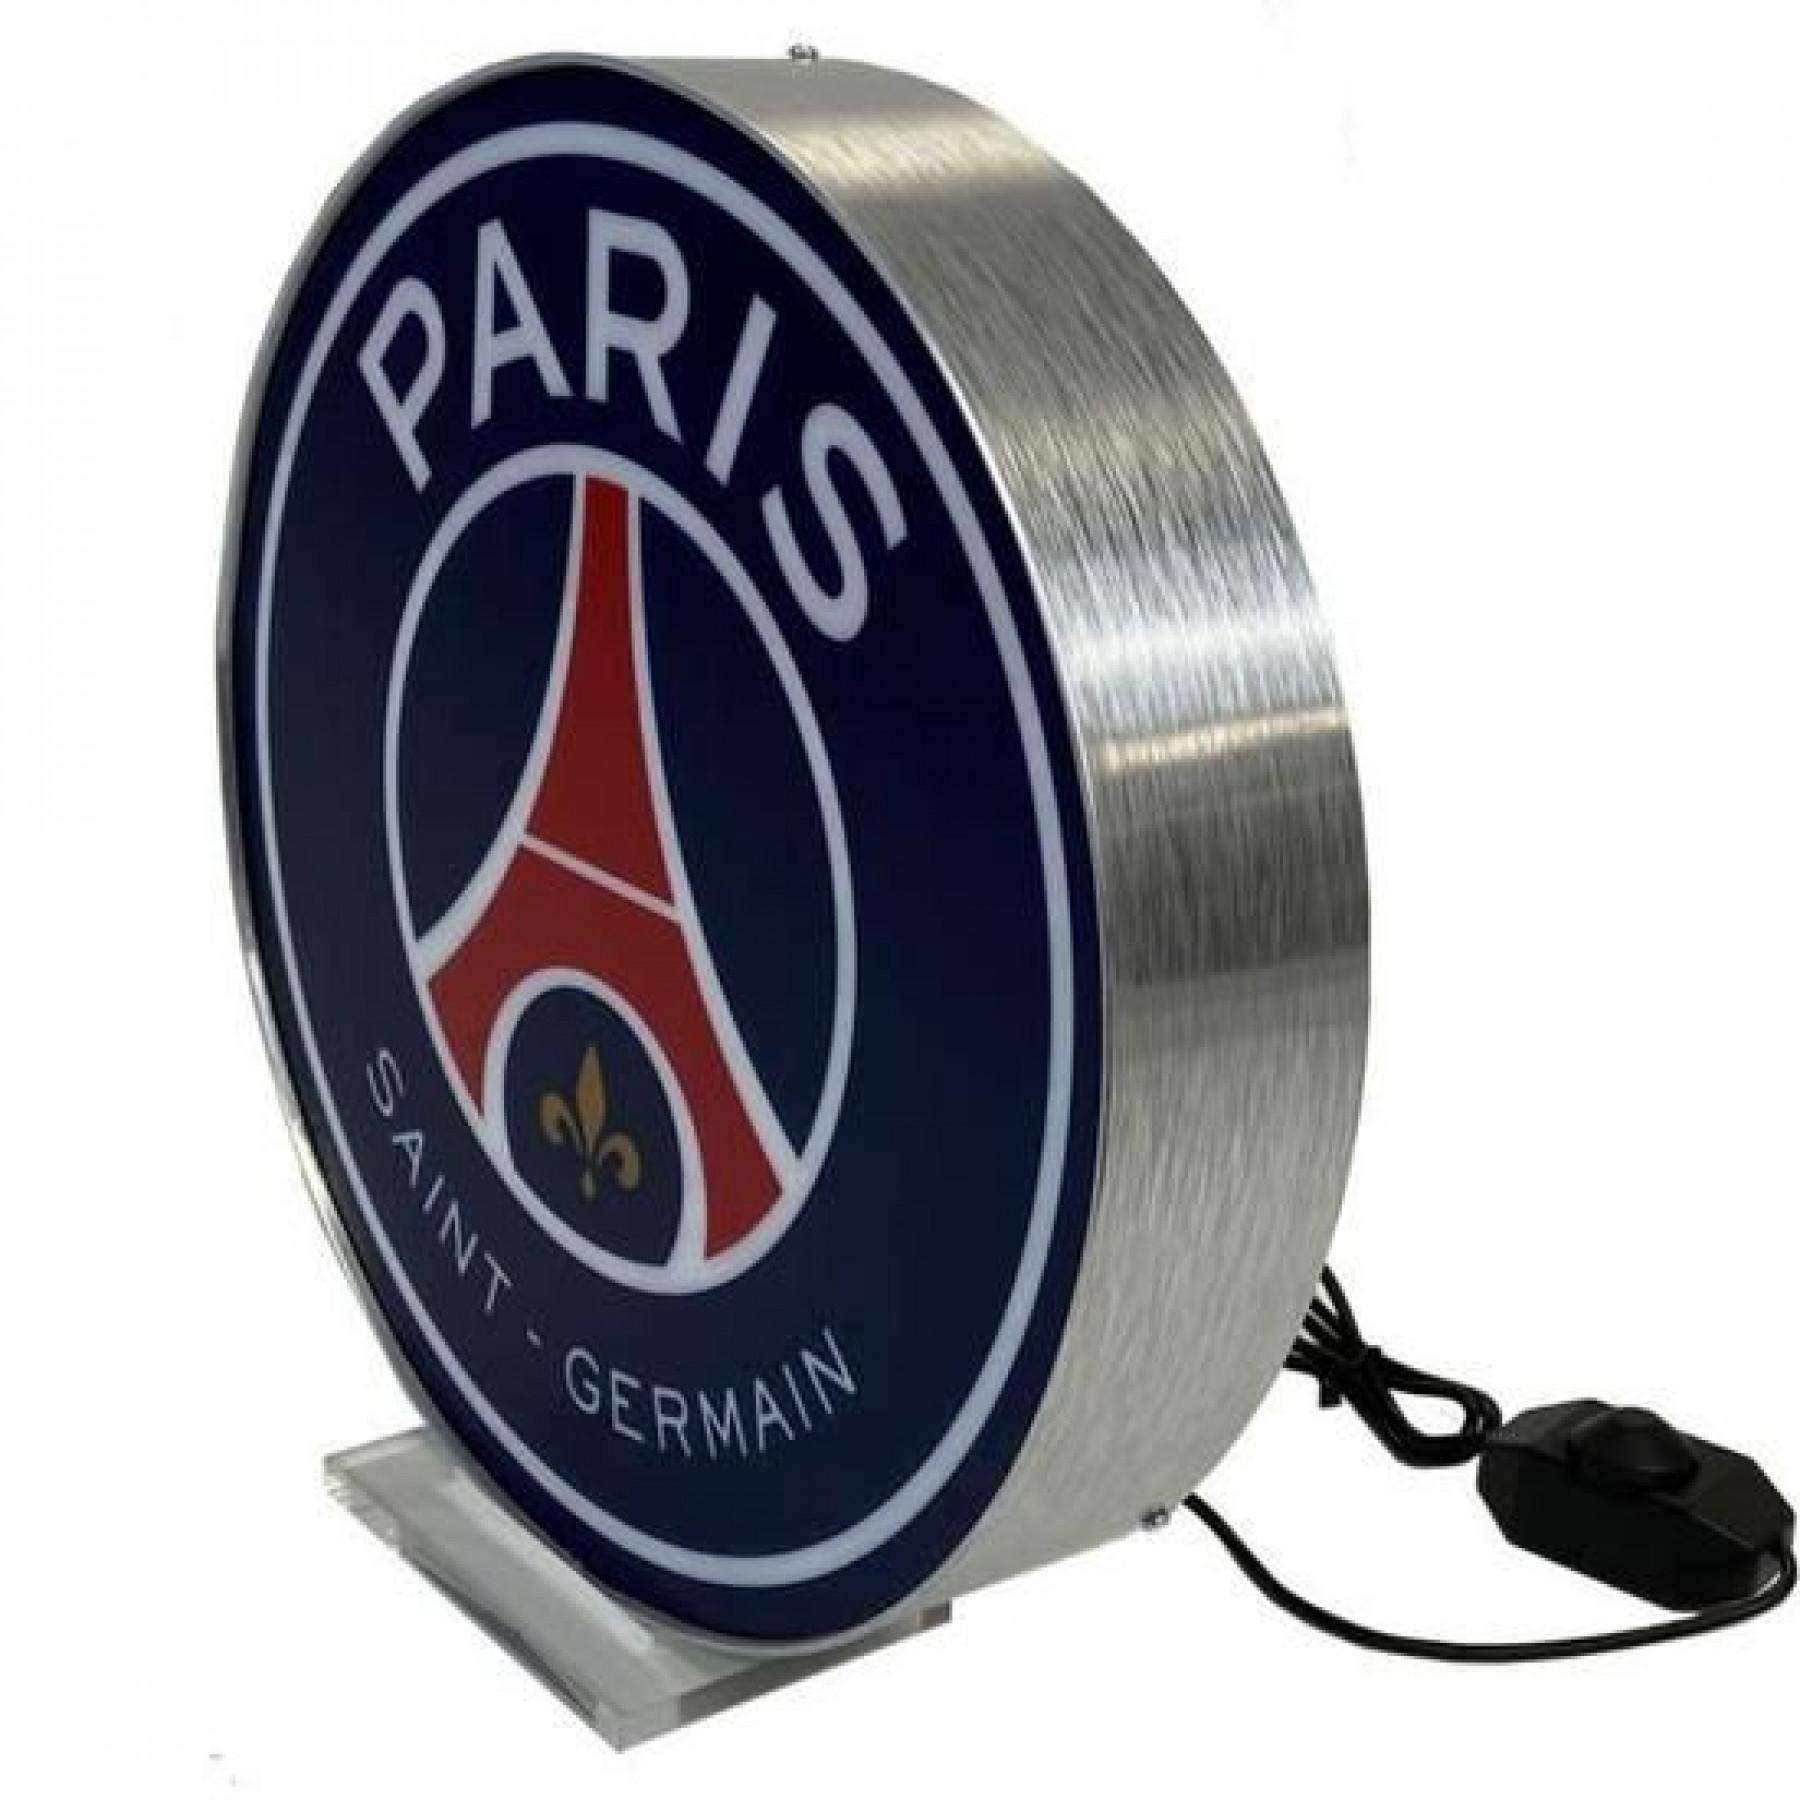 PSG Logo 3D LED Lamp with a base of your choice! - PictyourLamp